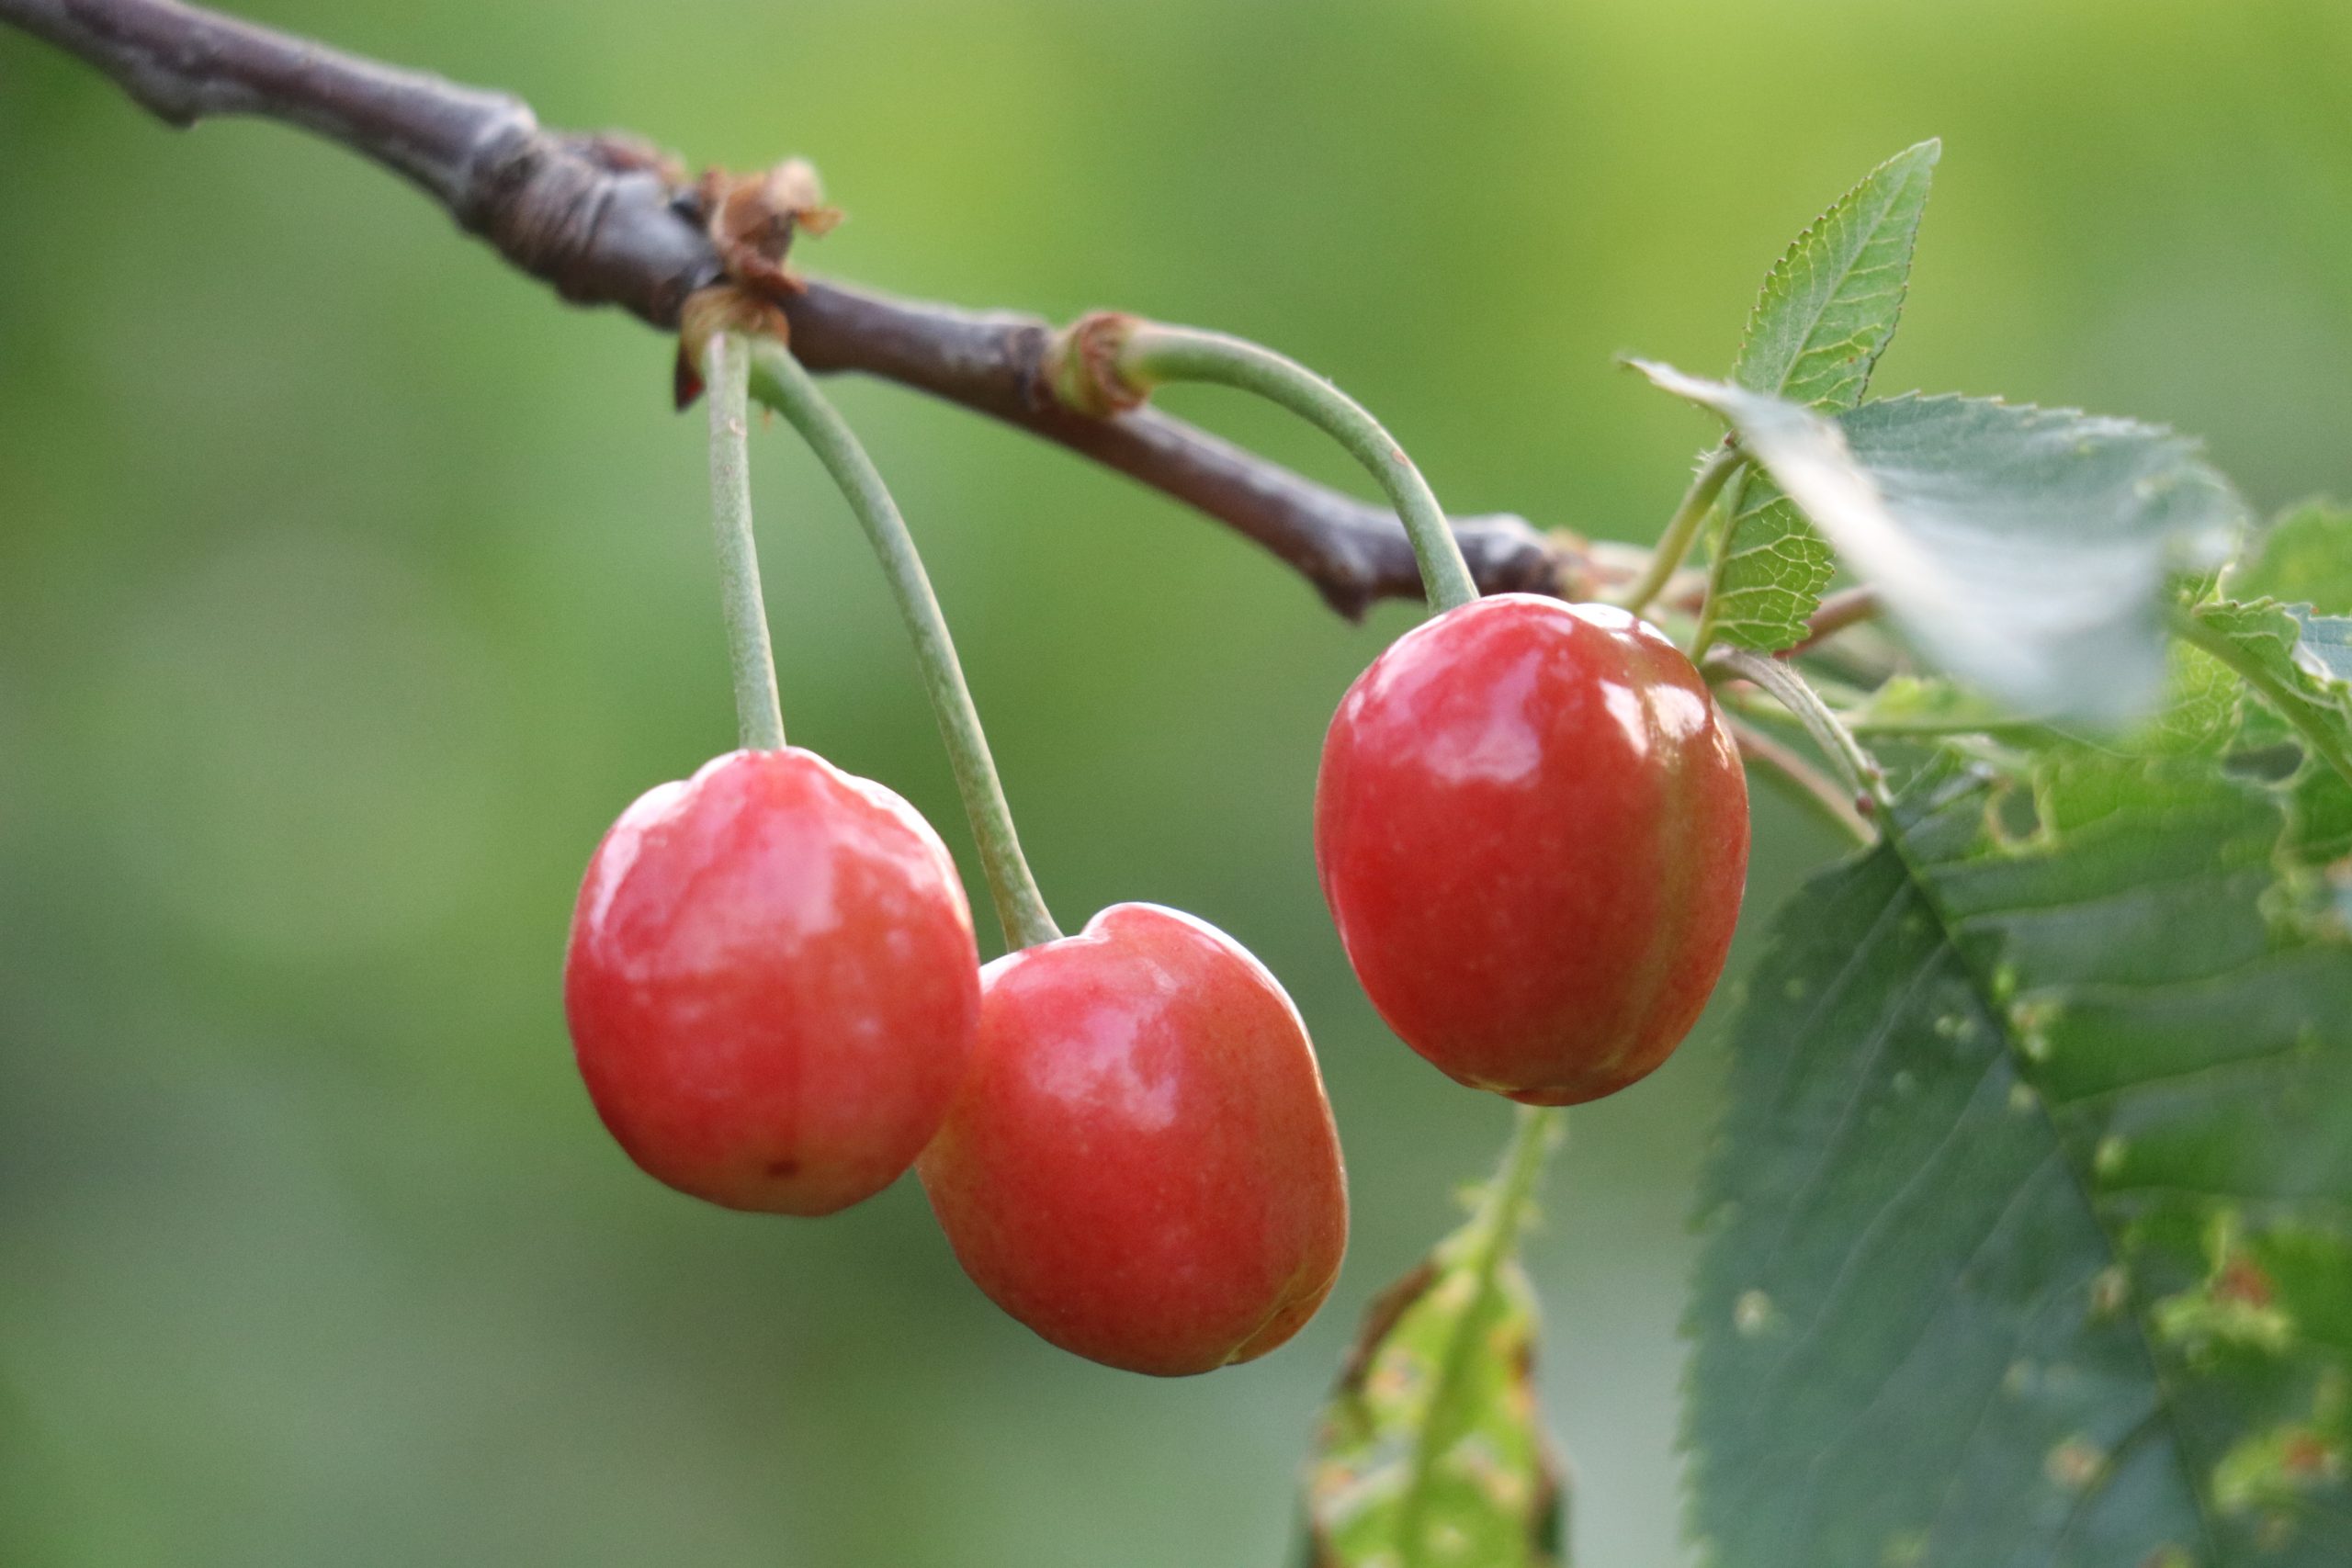 Red cherries on a branch